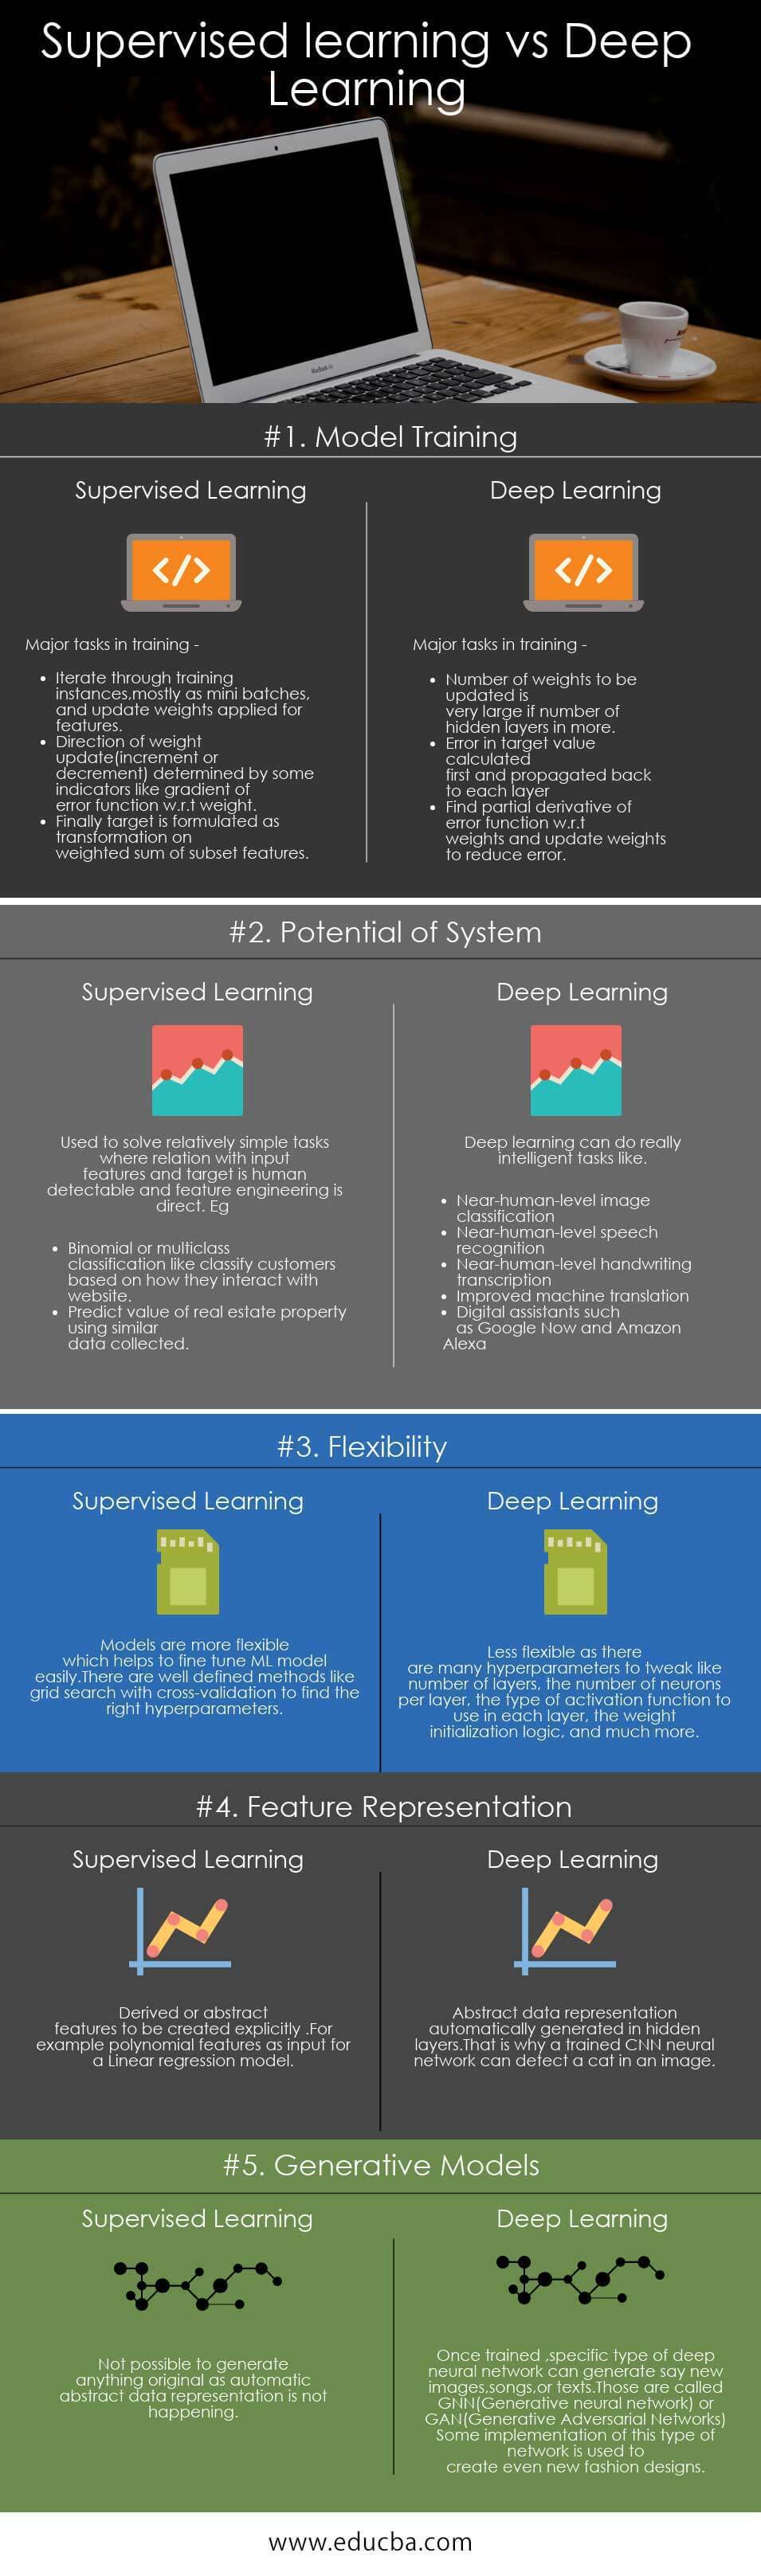 Supervised learning vs Deep learning